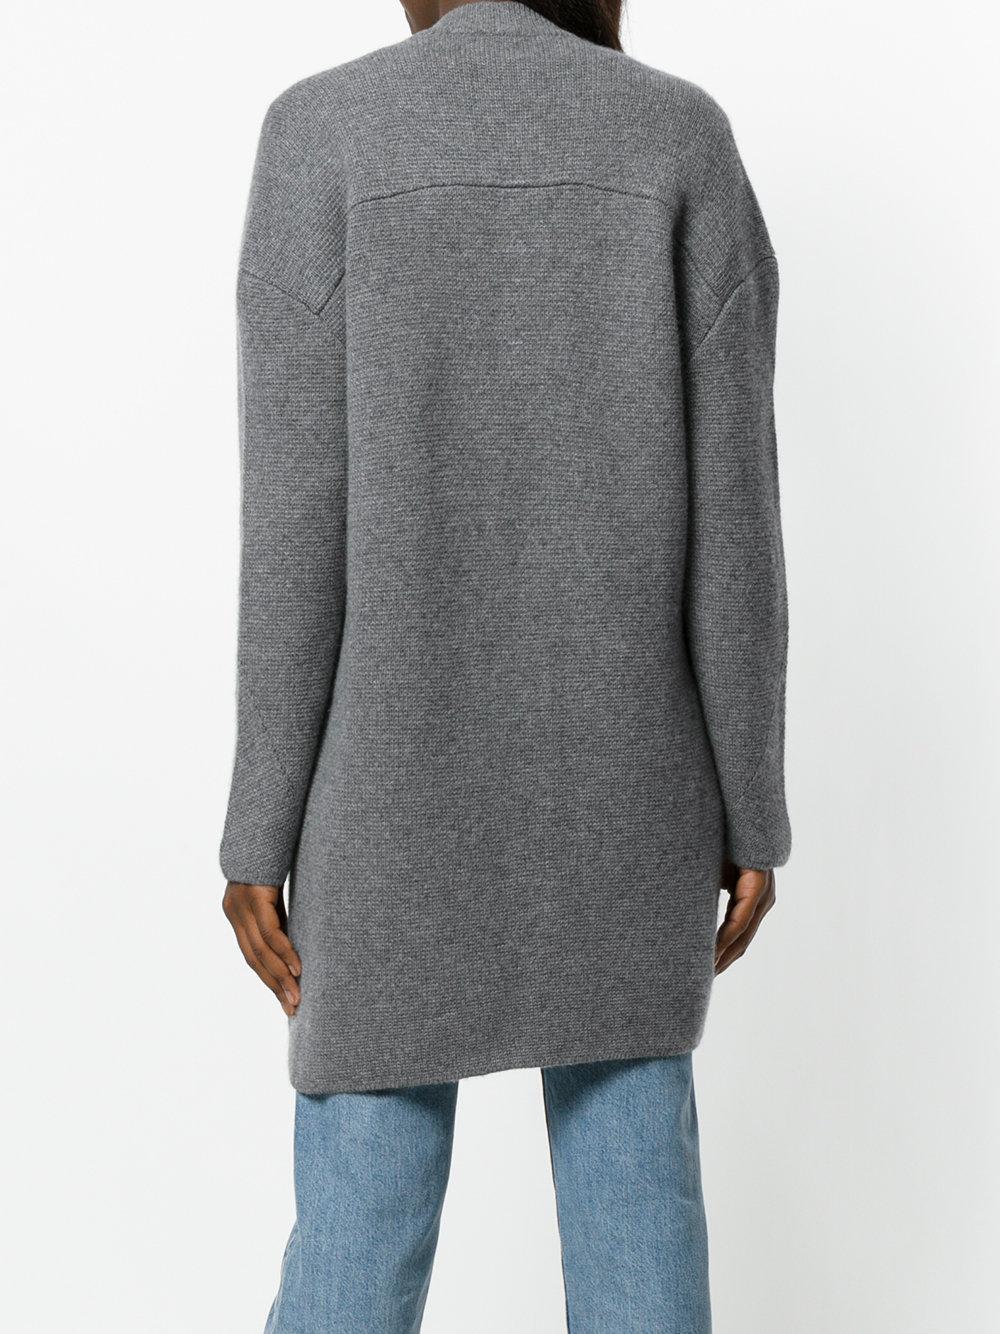 Le Kasha Cashmere Rome Cardigan in Grey (Gray) - Lyst